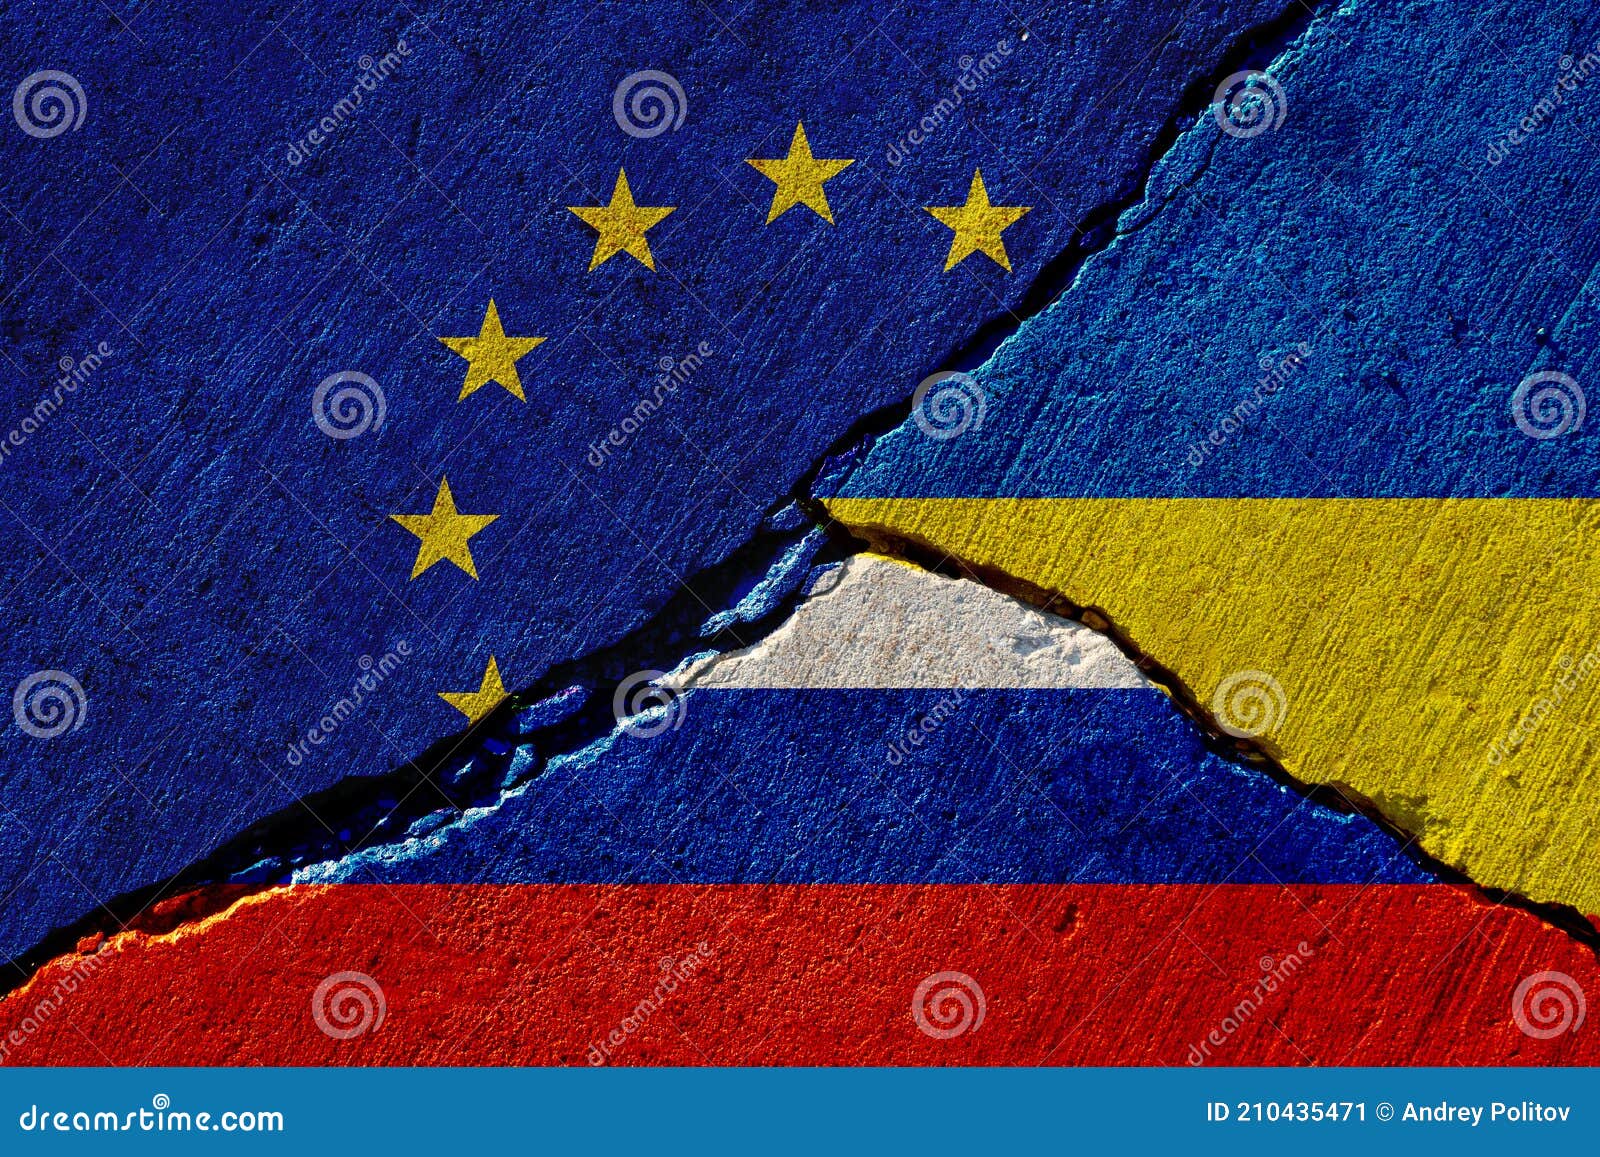 cracked wall with painted eu, russia and ukraine flags